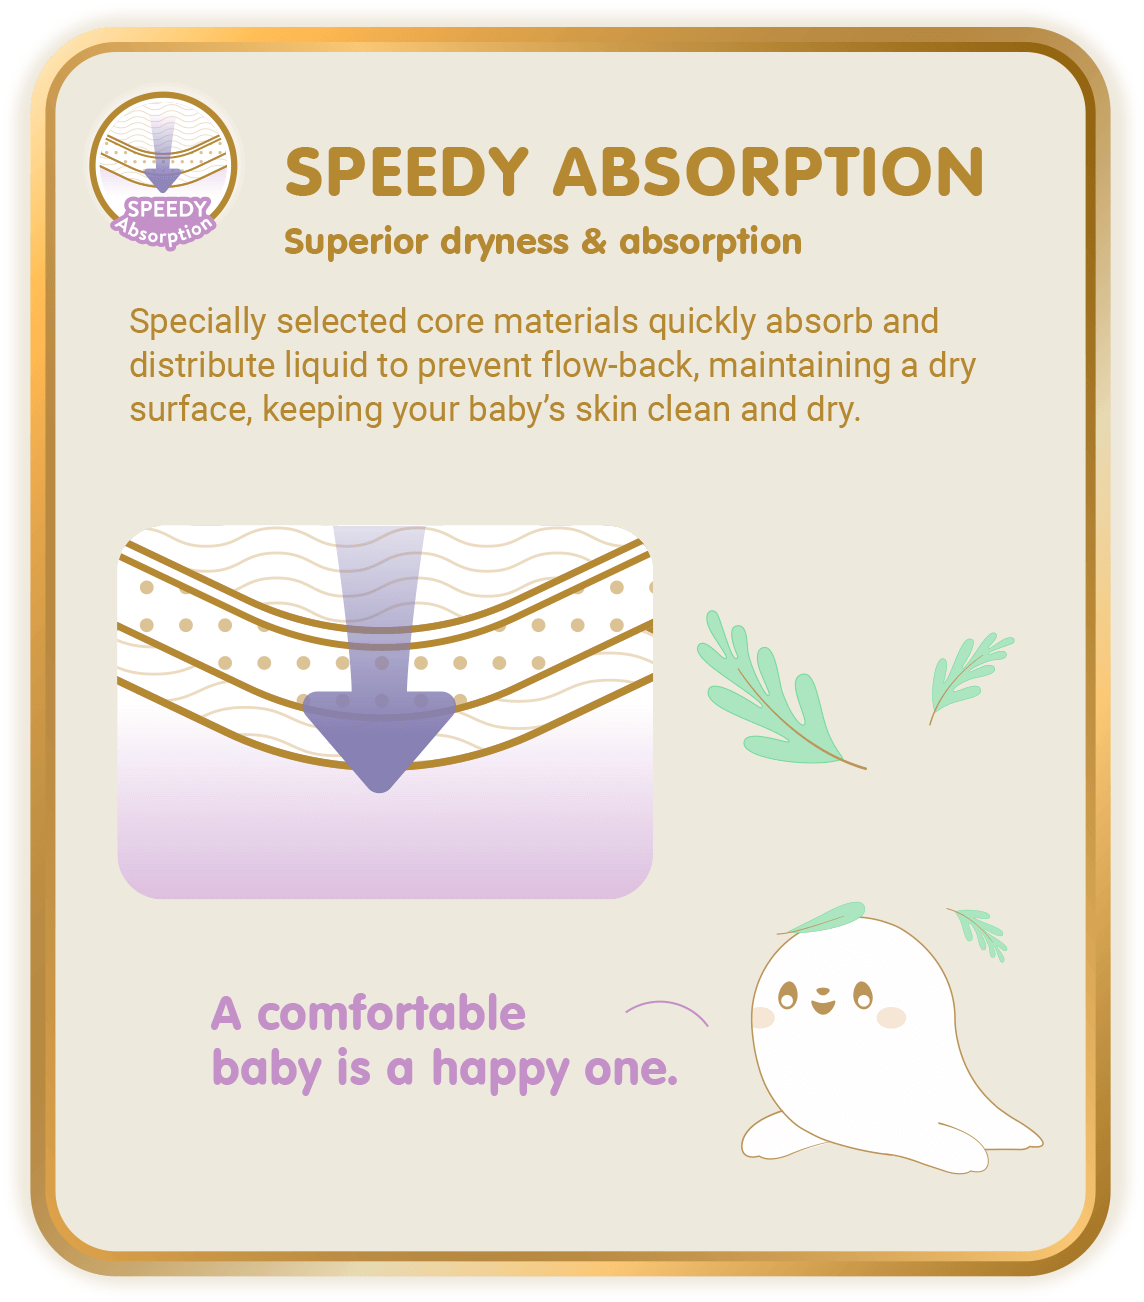 Speedy Absorption, Superior dryness & absorption: Specially selected core materials quickly absorb and distribute liquid to prevent flow-back, maintaining a dry surface, keeping your baby’s skin clean and dry.